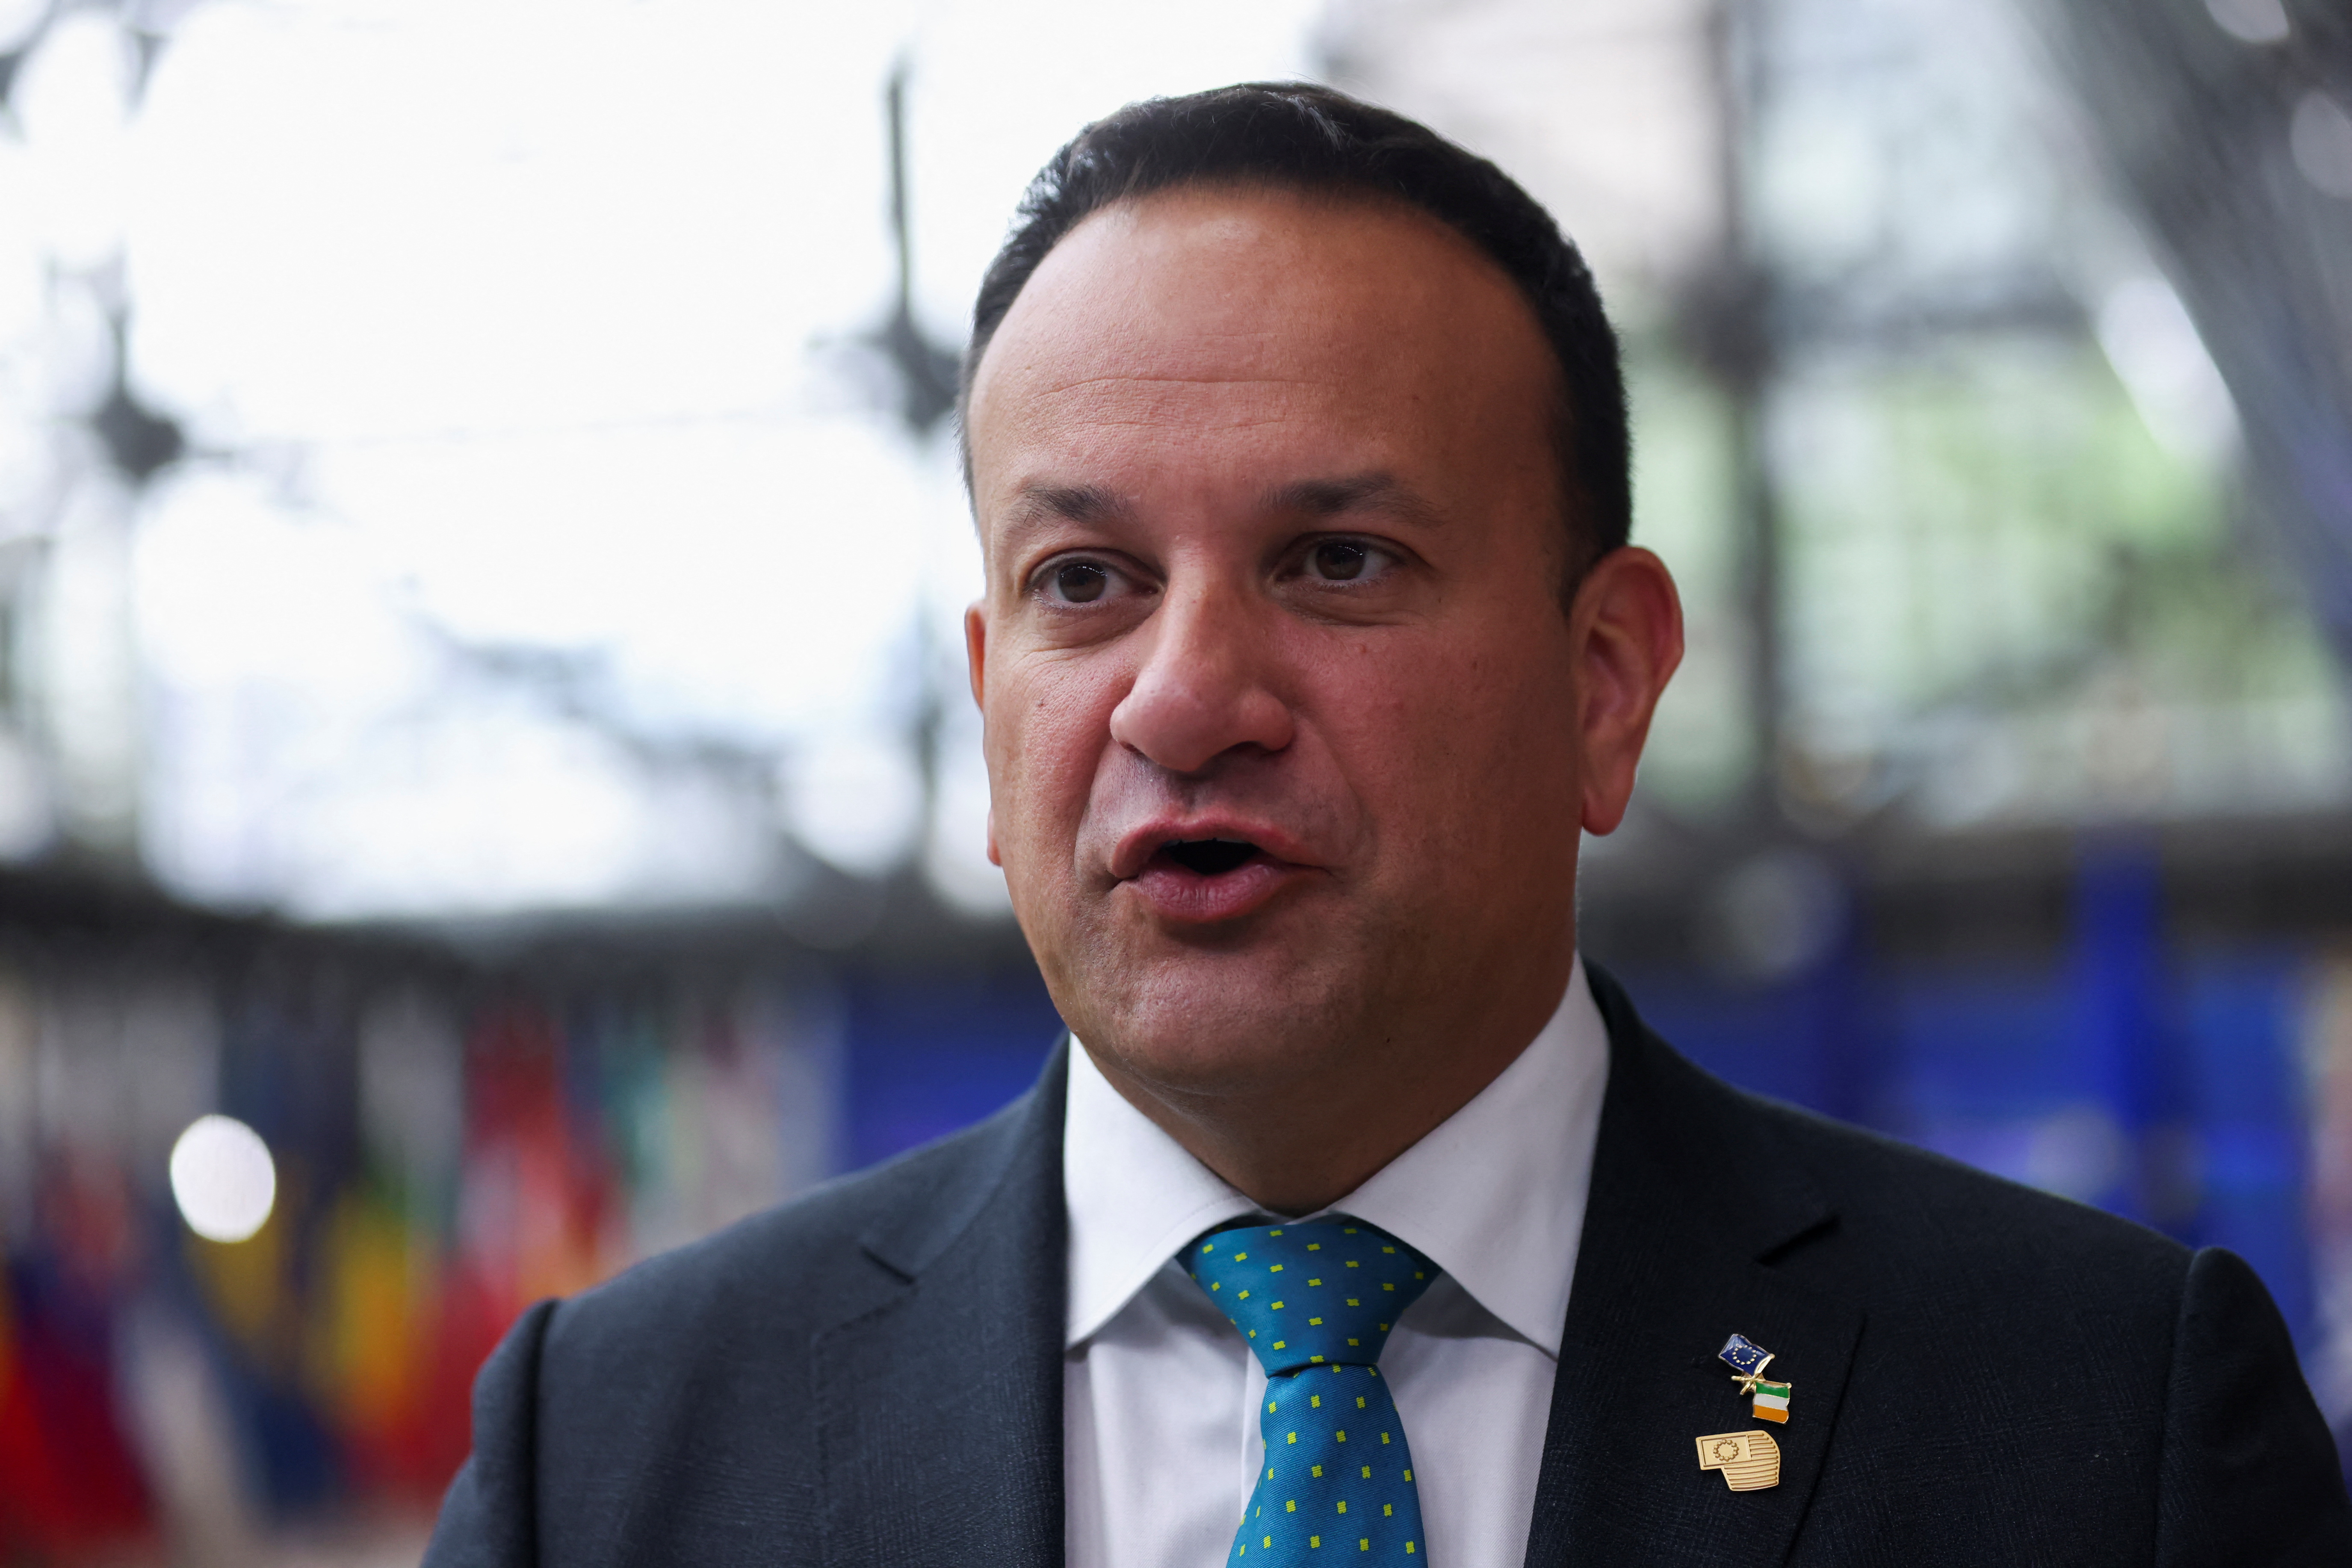 Irish Prime Minister, Leo Varadkar, says he sees China as a partner and not an enemy and wants to maintain a healthy relationship with the country. /Johanna Geron/Reuters